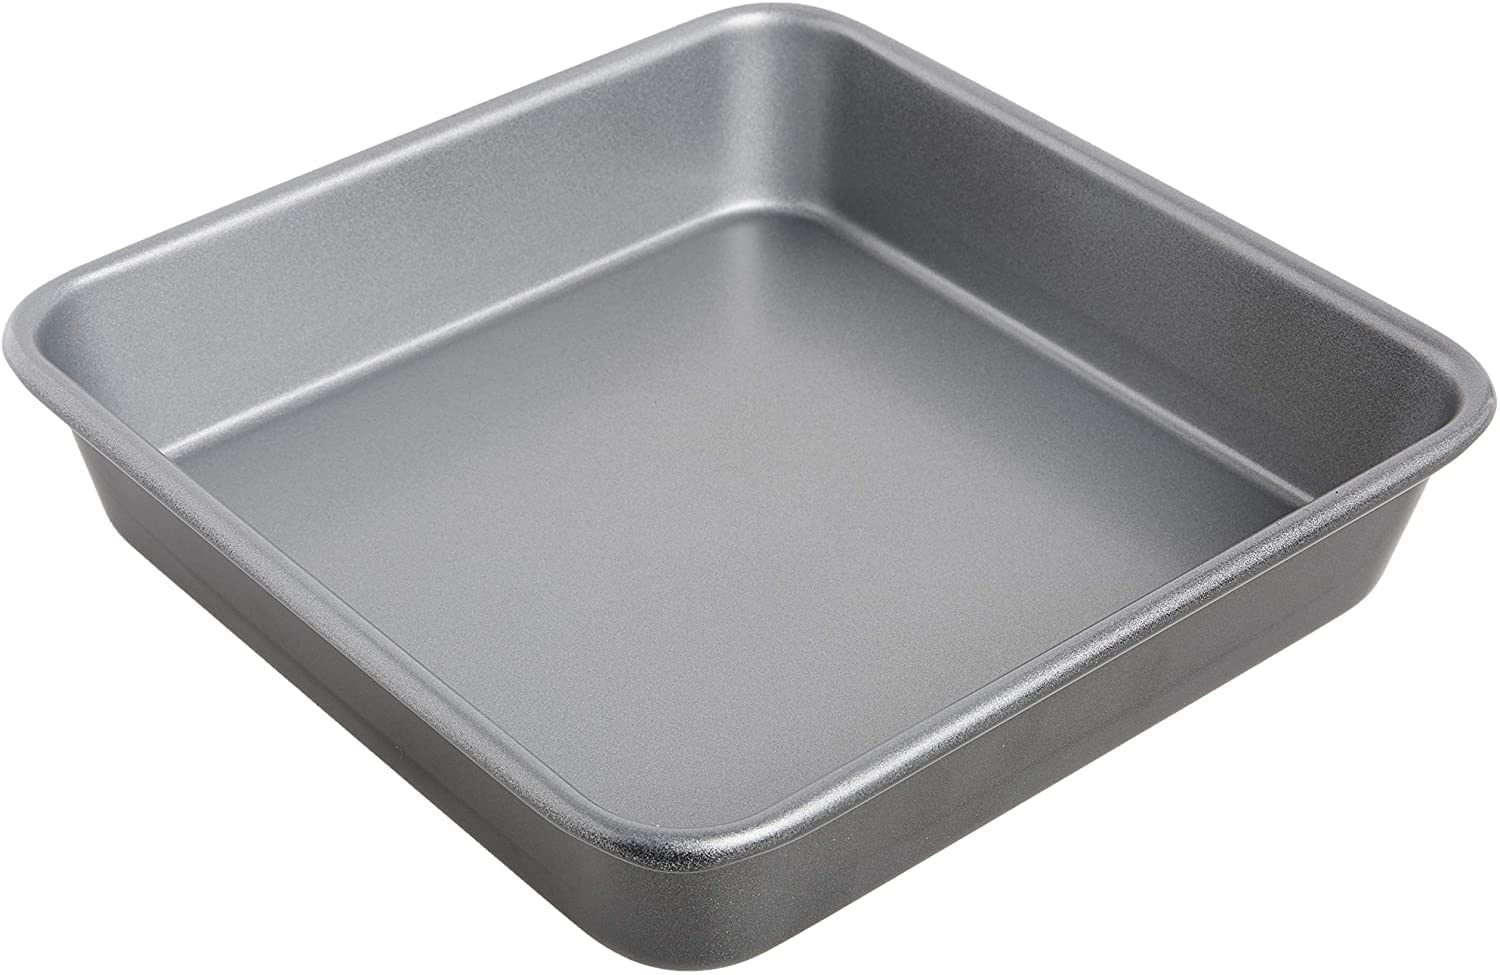 Cuisinart 9-Inch Chef's Classic Nonstick Bakeware Square Cake Pan, Silver & AMB-15BS 15-Inch Chef's Classic Nonstick Bakeware Baking Sheet, Silver